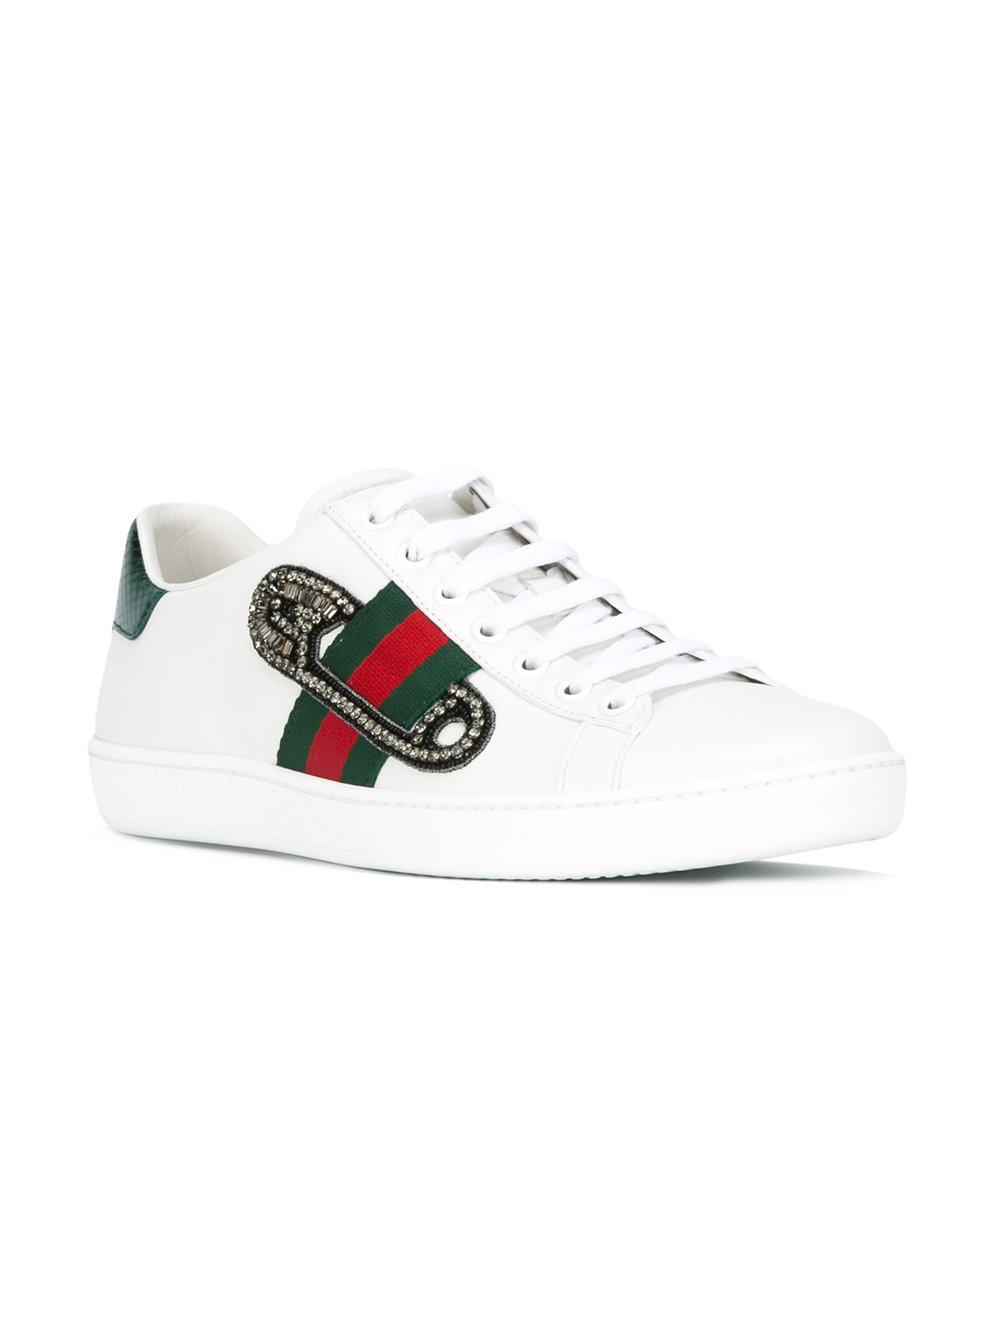 Lyst - Gucci Gg Vintage Web Safety Pin Sneakers in White